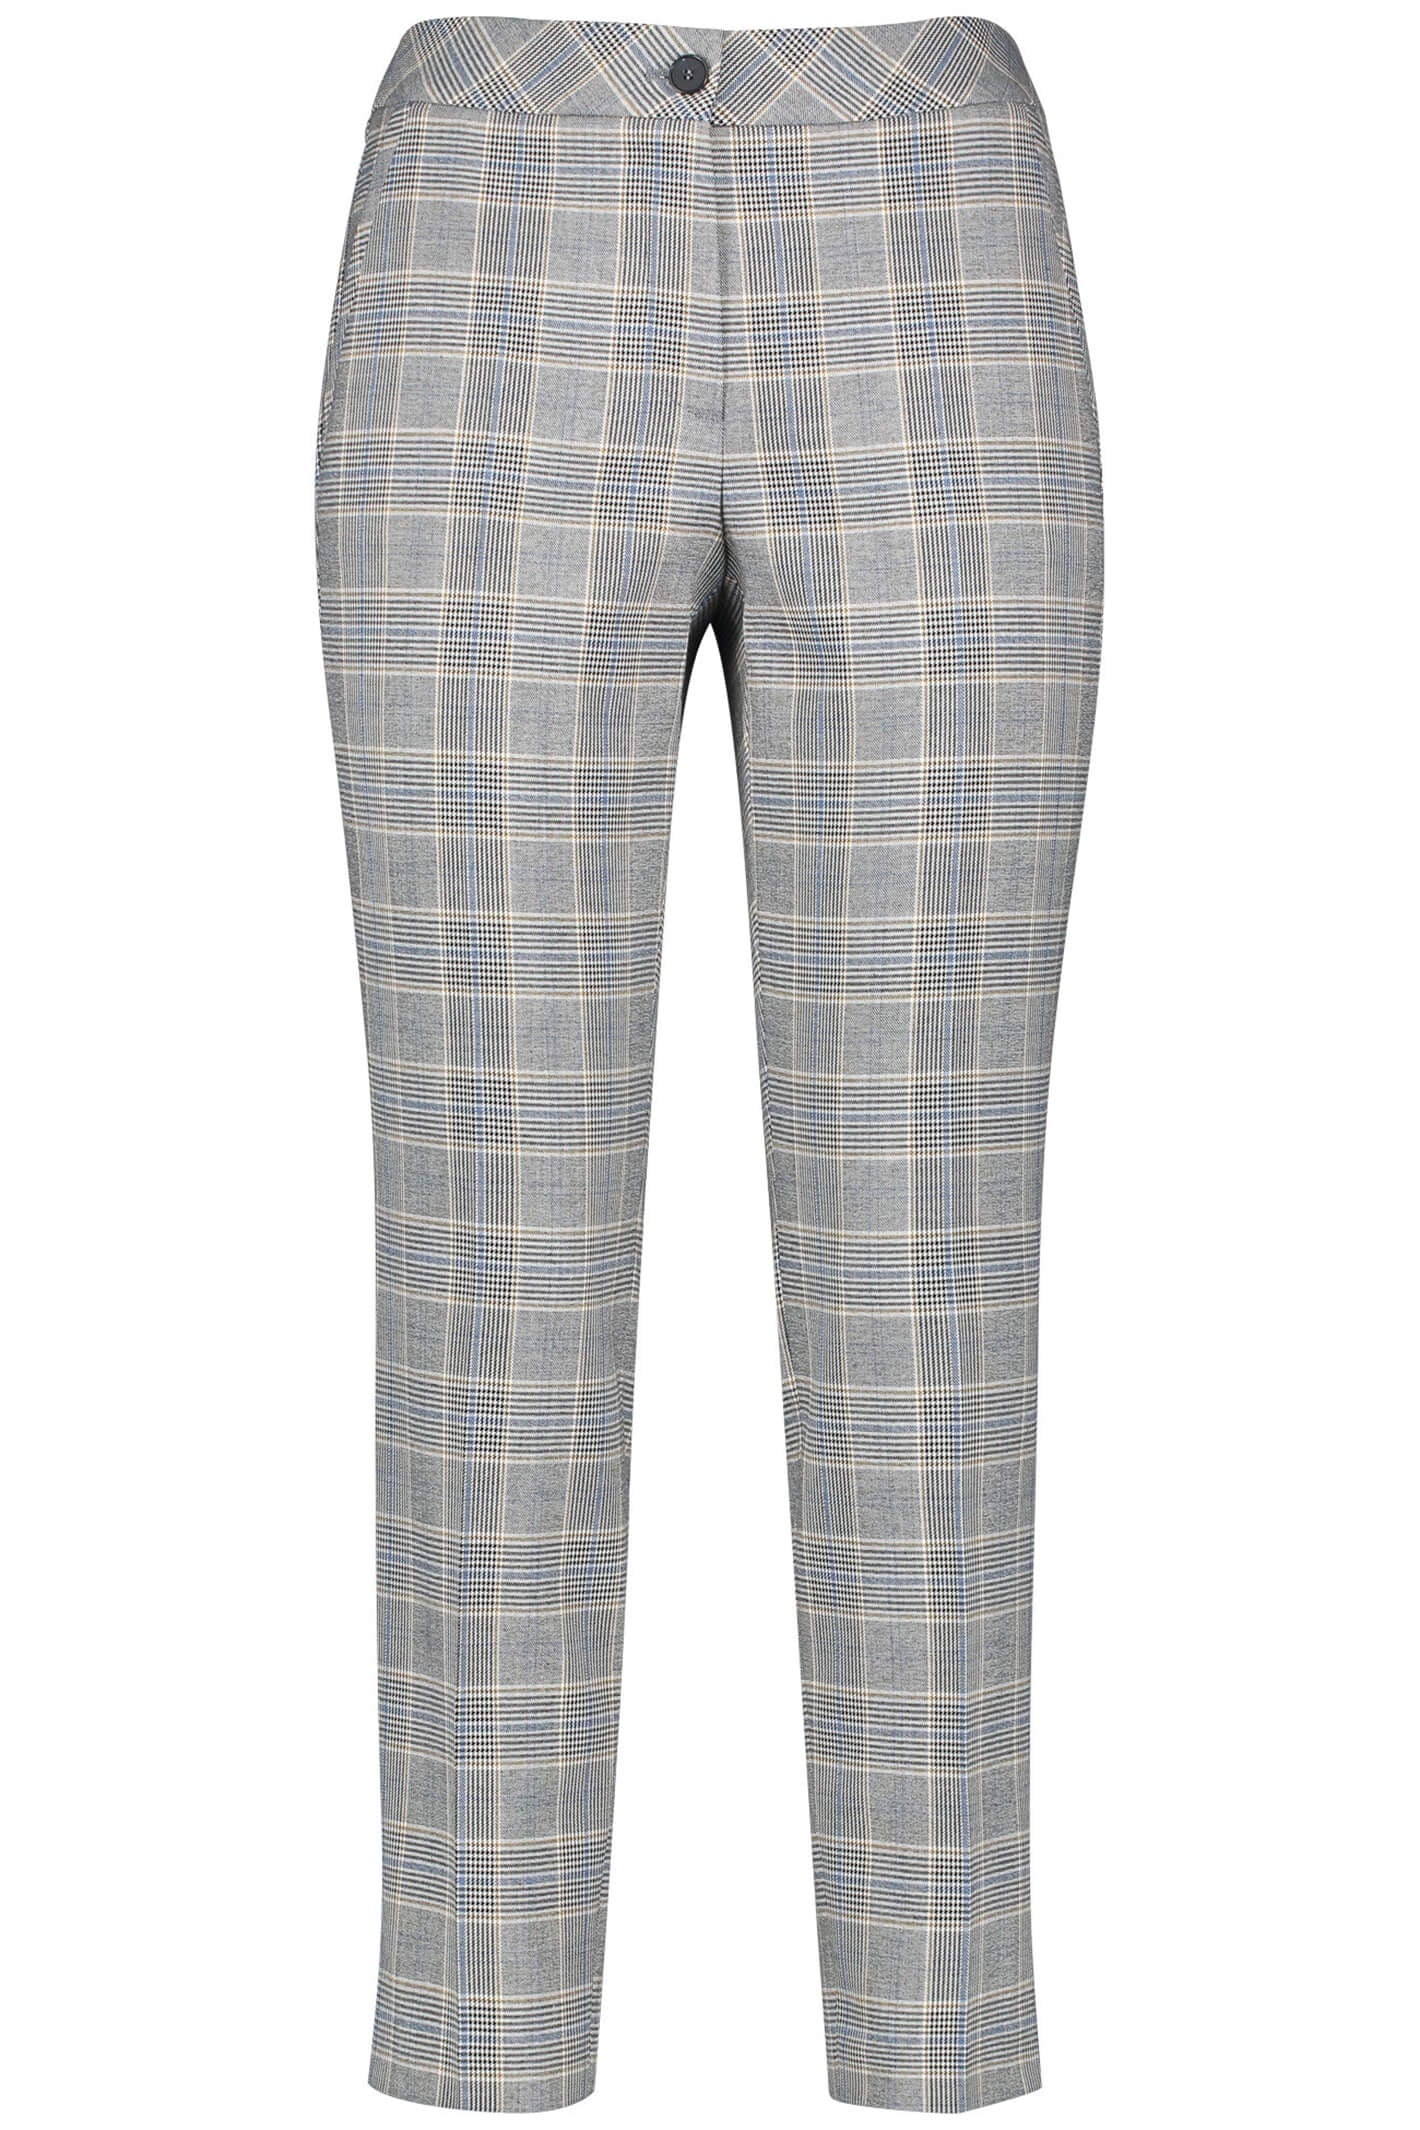 Buy Grey Check Tailored Elasticated Back Skinny Trousers from Next Ireland